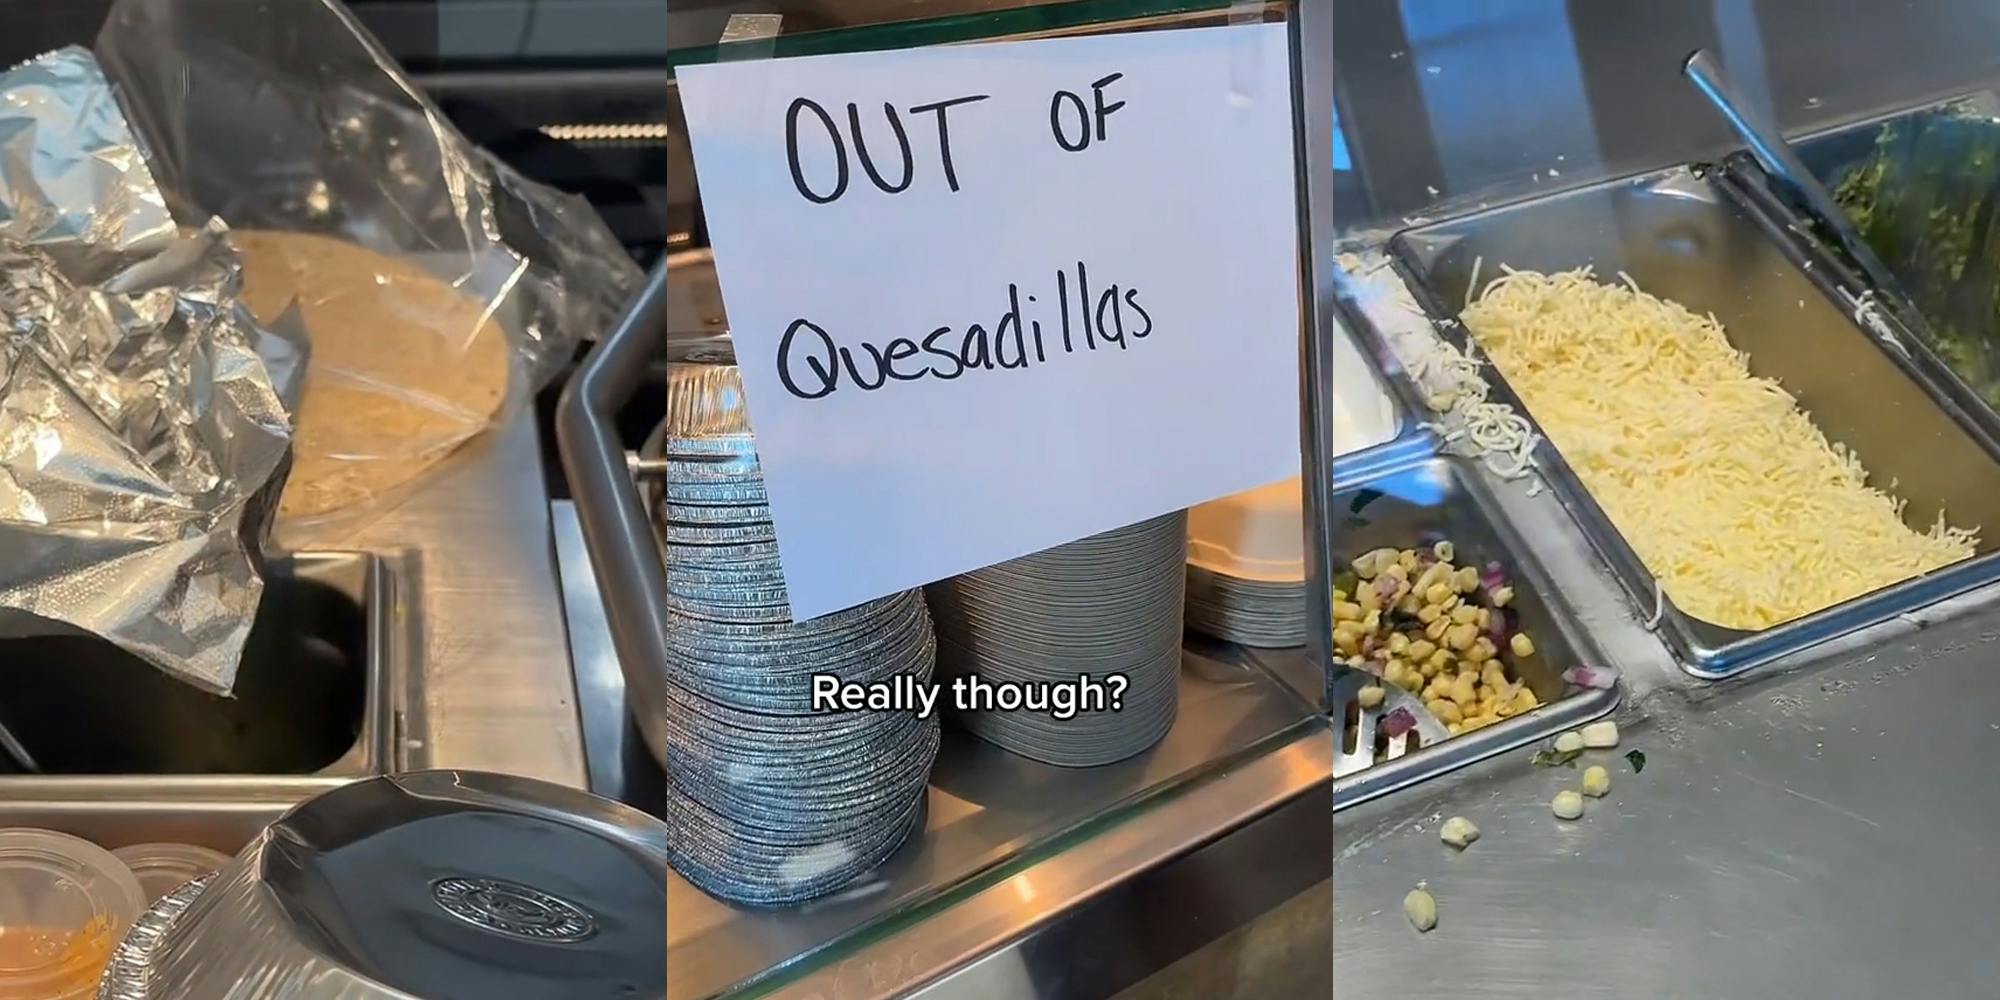 Chipotle counter with tortilla (l) Chipotle counter with paper that reads "OUT OF QUESADILLAS" taped on with caption "Really though?" (c) Chipotle counter with cheese and other ingredients available (r)